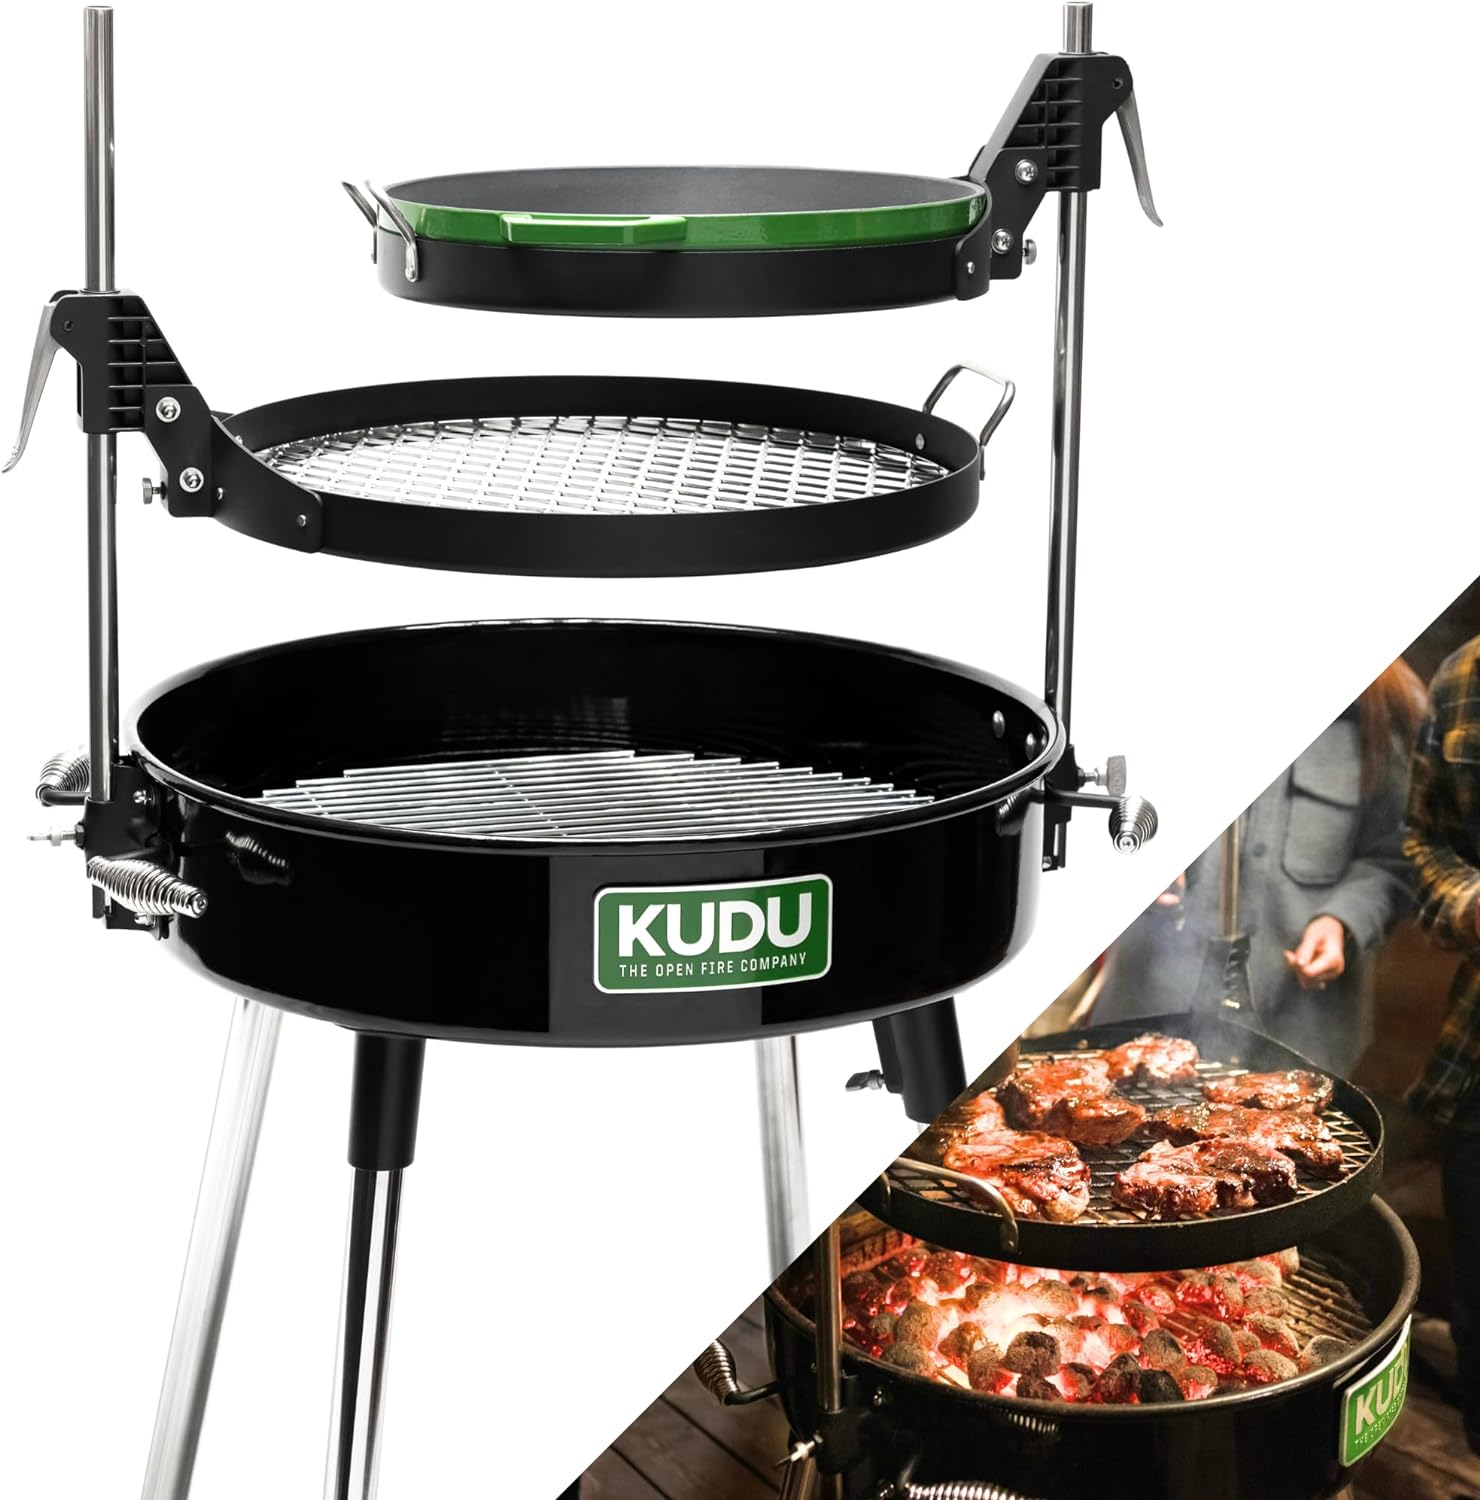 KUDU 3 Grill - Open Fire BBQ Grilling System, Portable Charcoal Grills - Barbecue Whizz...Watch My Smoke!